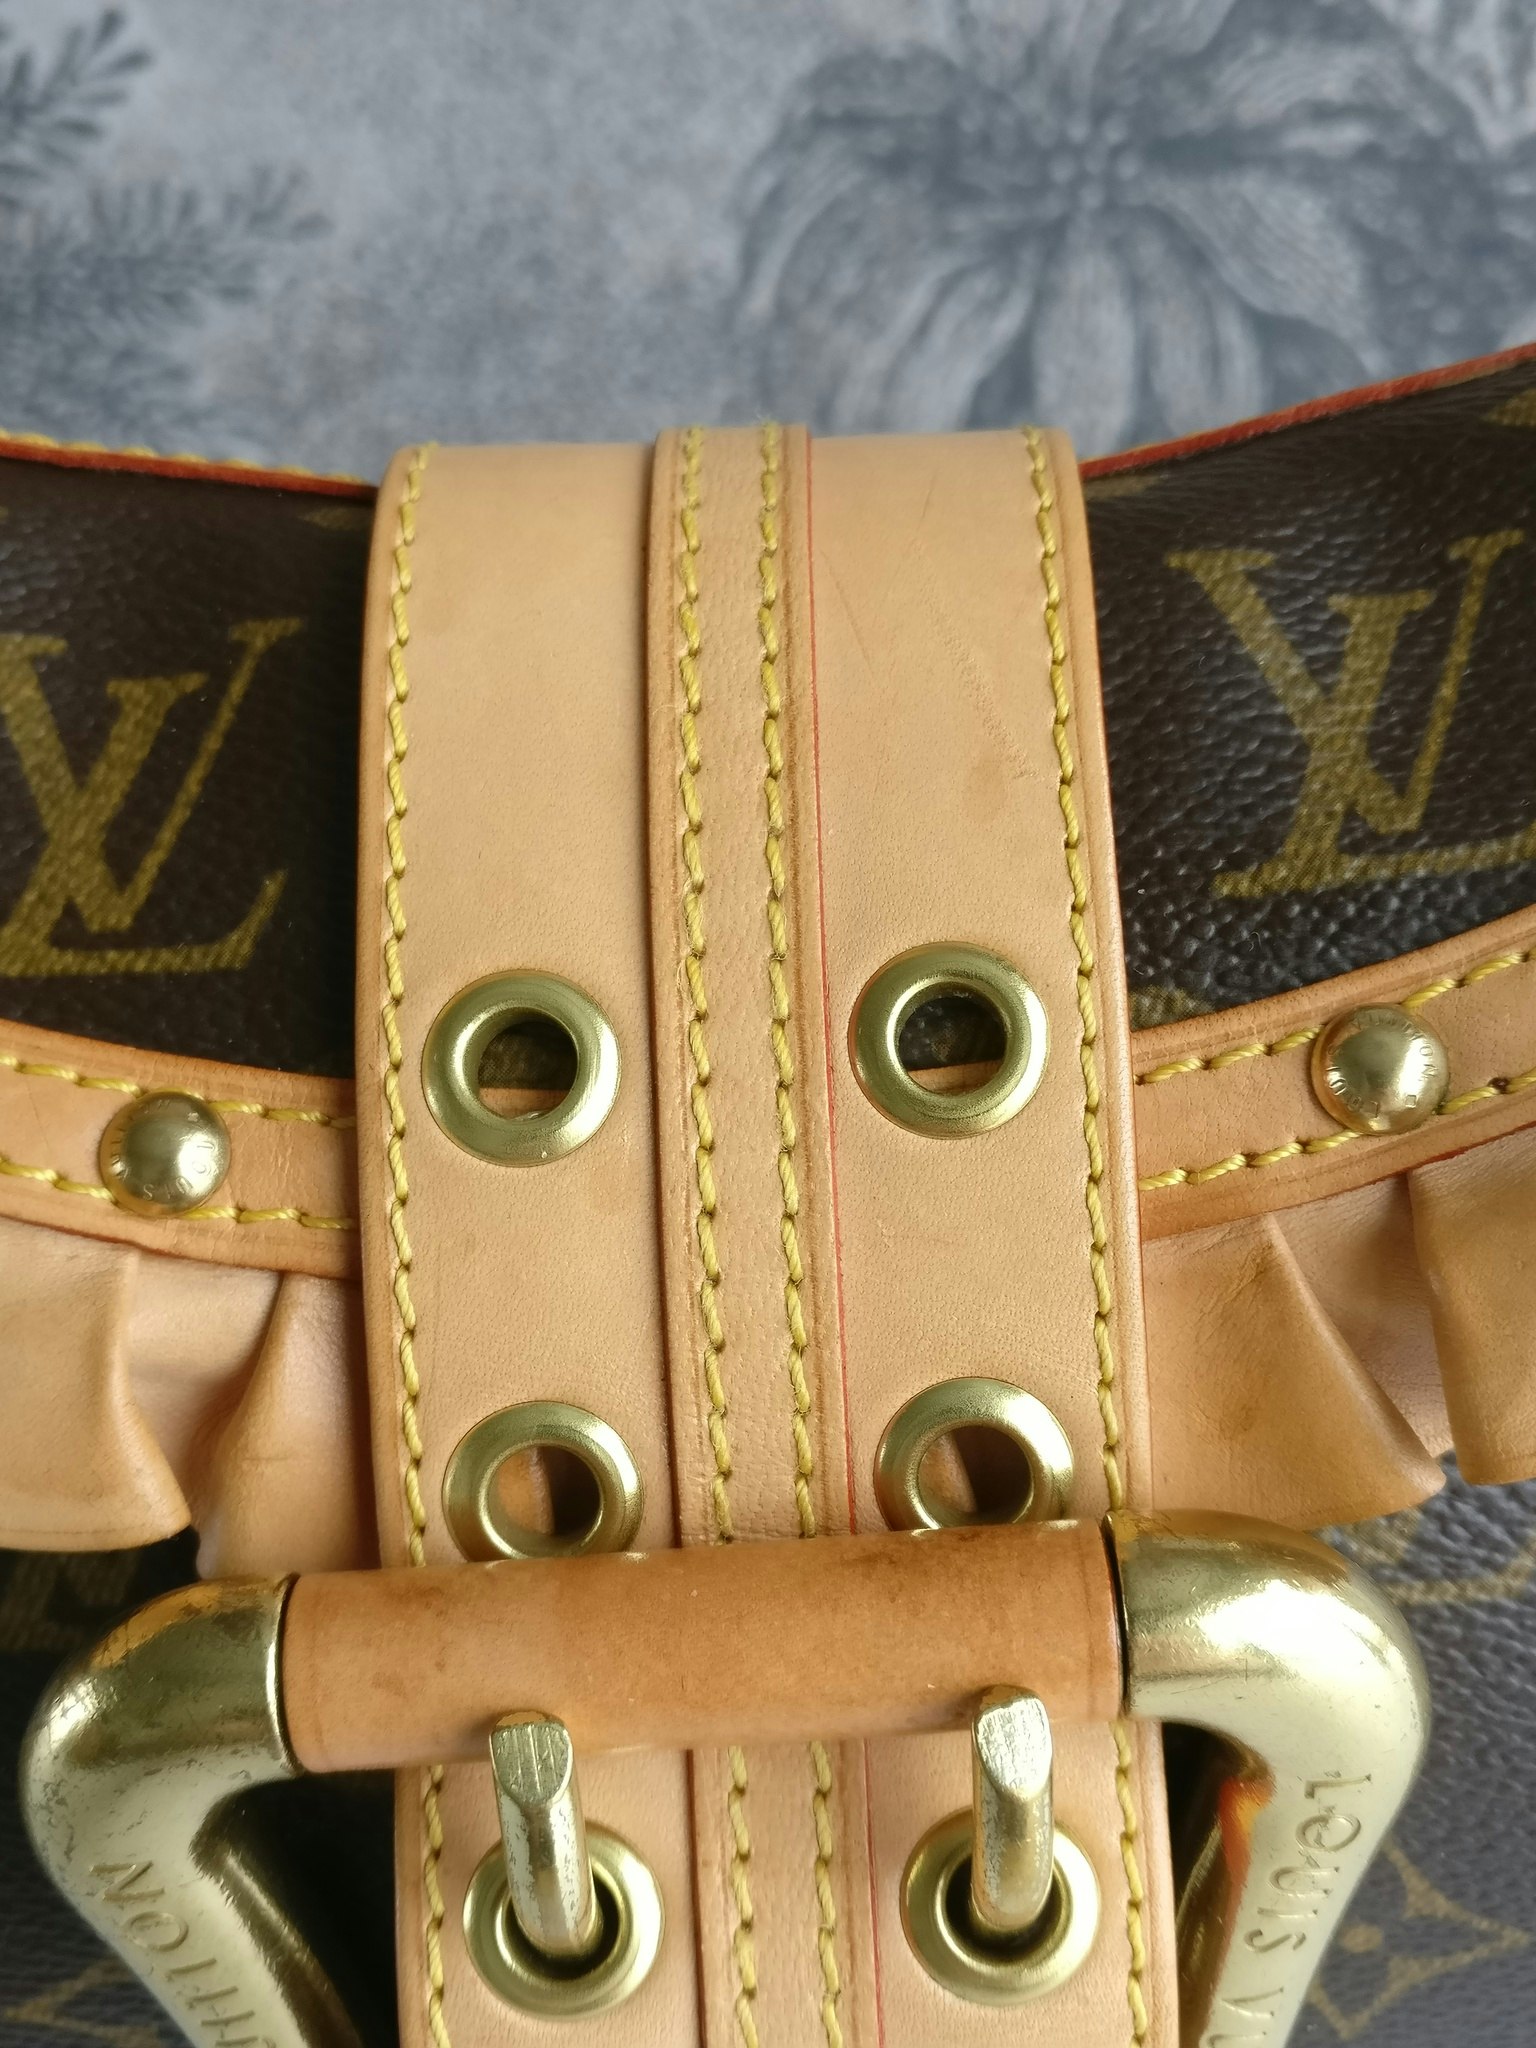 Limited LV Monogram leonor bag (Never used and kept in closet)., By Italy  Station 意大利站